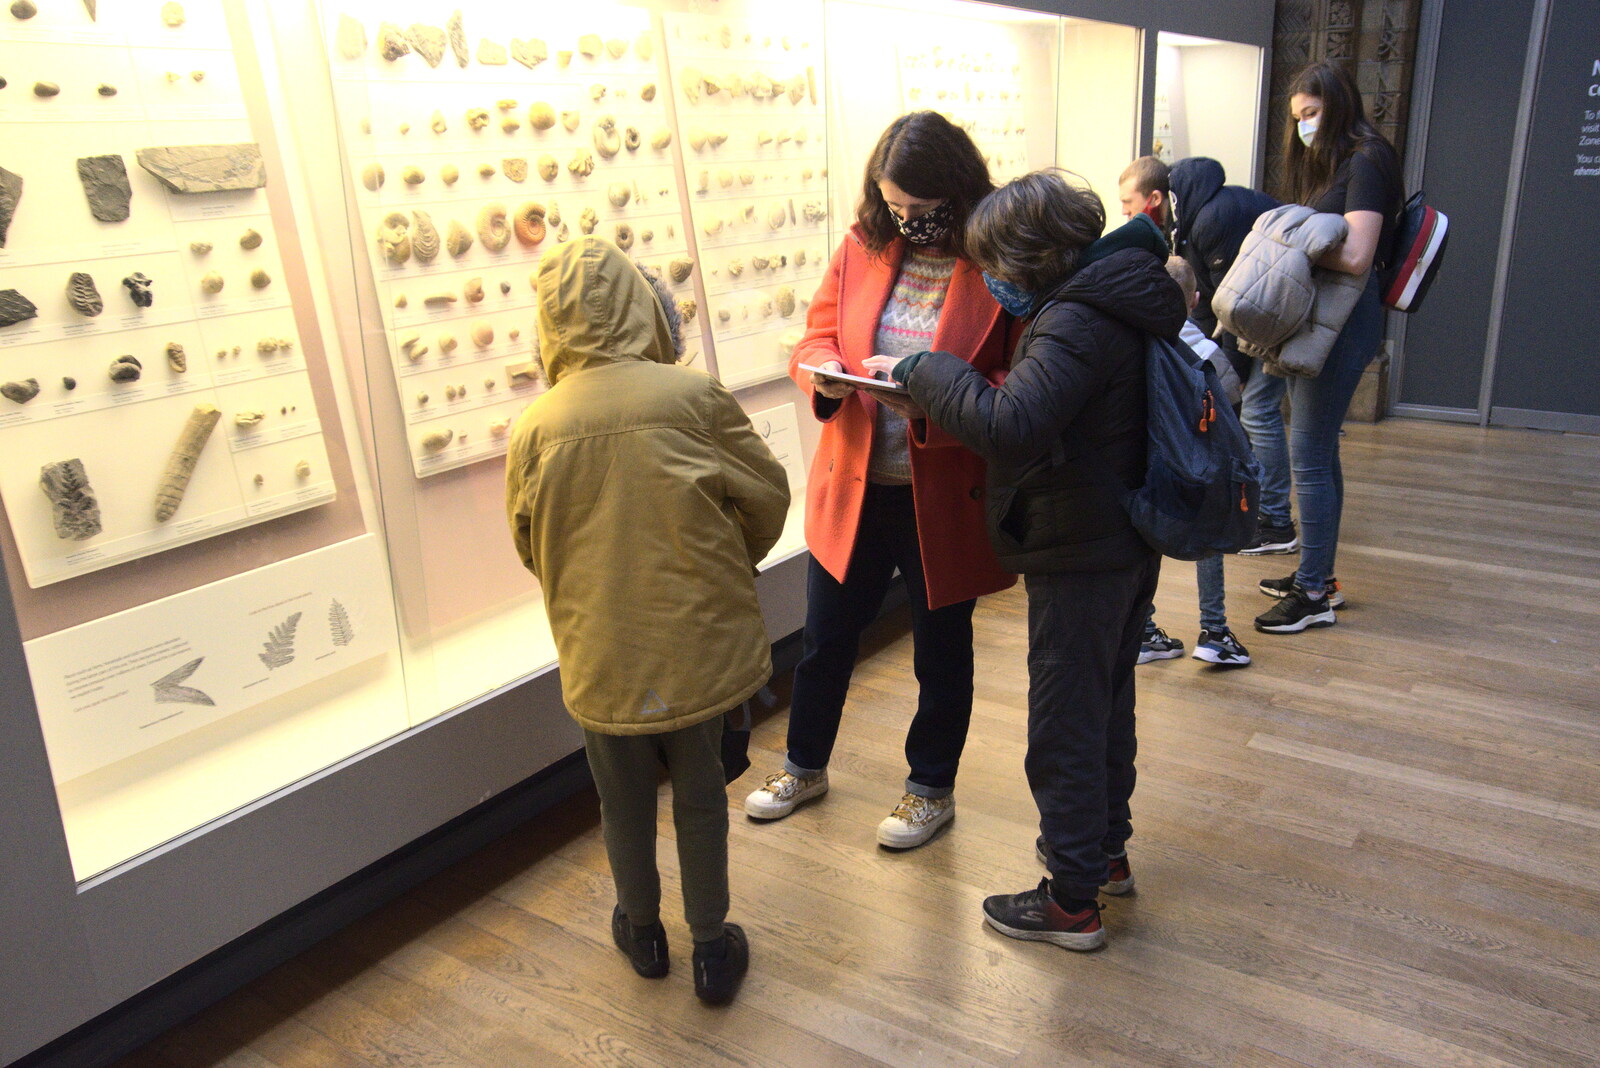 We look at more fossils from A Trip to the Natural History Museum, Kensington, London - 15th January 2022